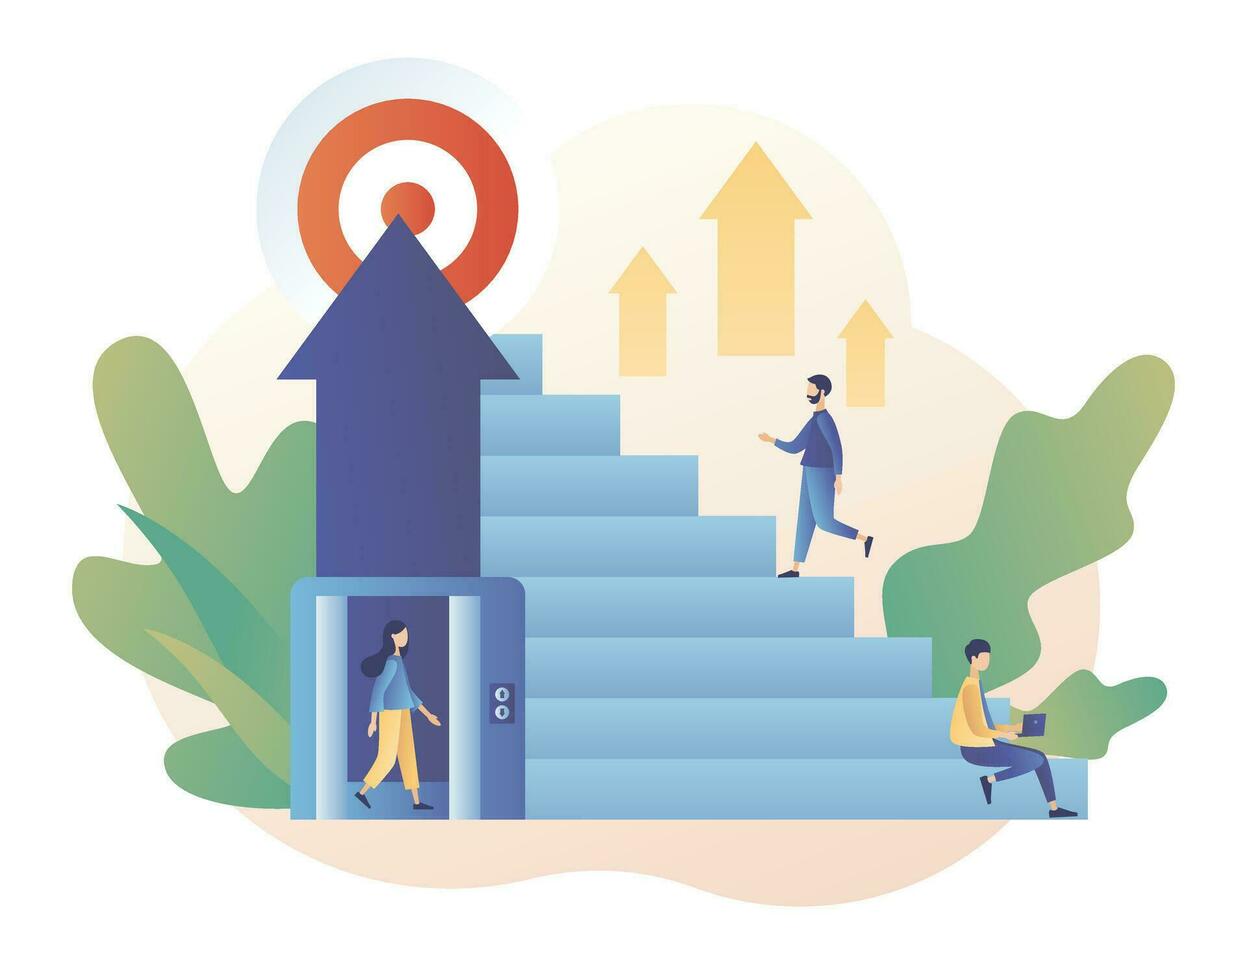 Efforts to achieve target. The metaphor different ways to achieve the goal. Tiny people choose a ladder or an elevator to success. Modern flat cartoon style. Vector illustration on white background